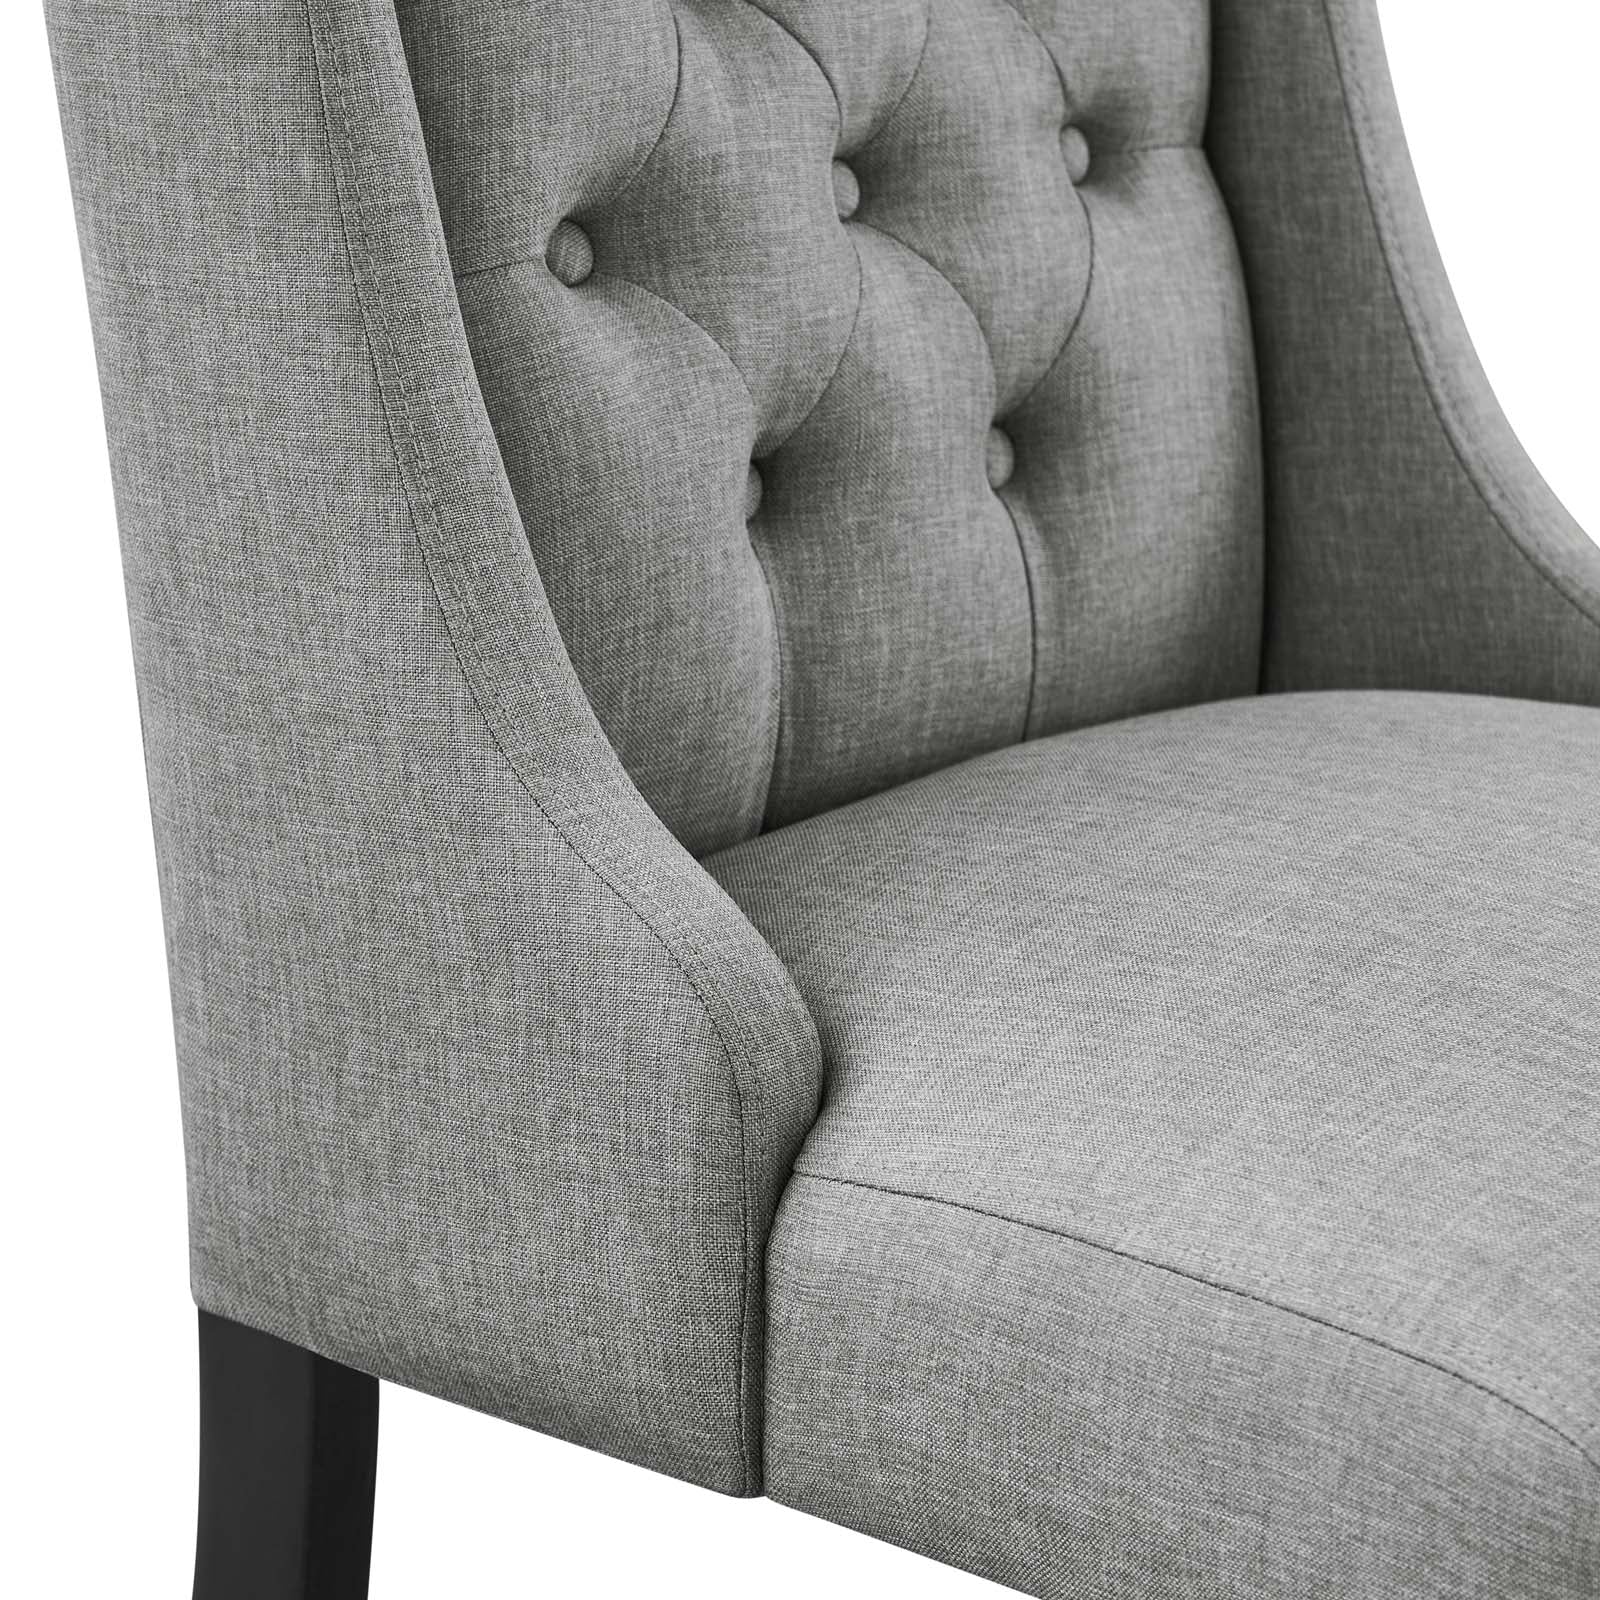 Modway Dining Chairs - Baronet Button Tufted Fabric Dining Chair Light Gray